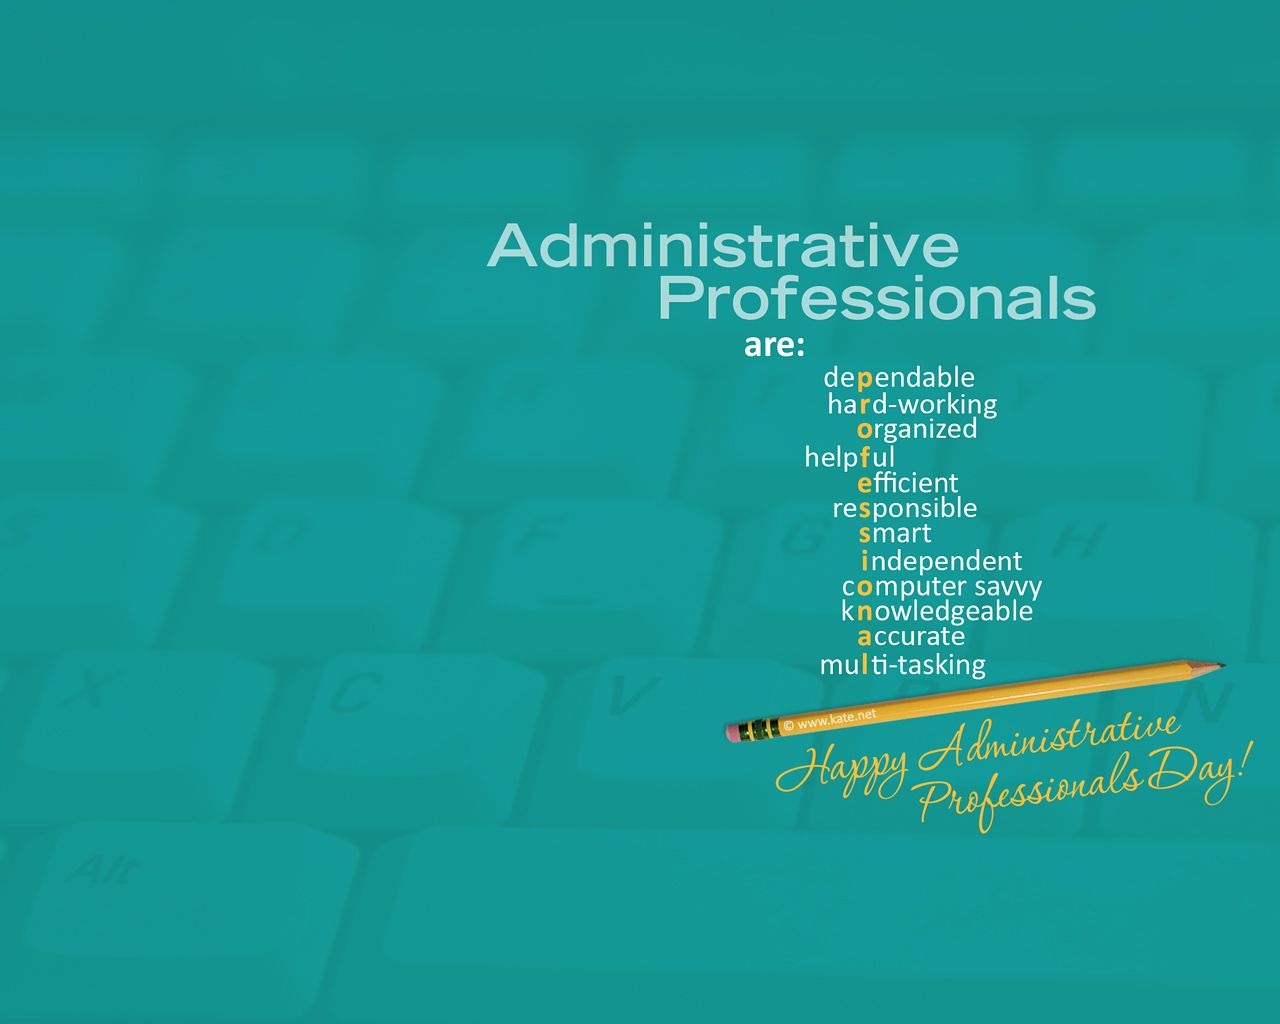 Administrative Professionals Day Wallpaper by Kate.net